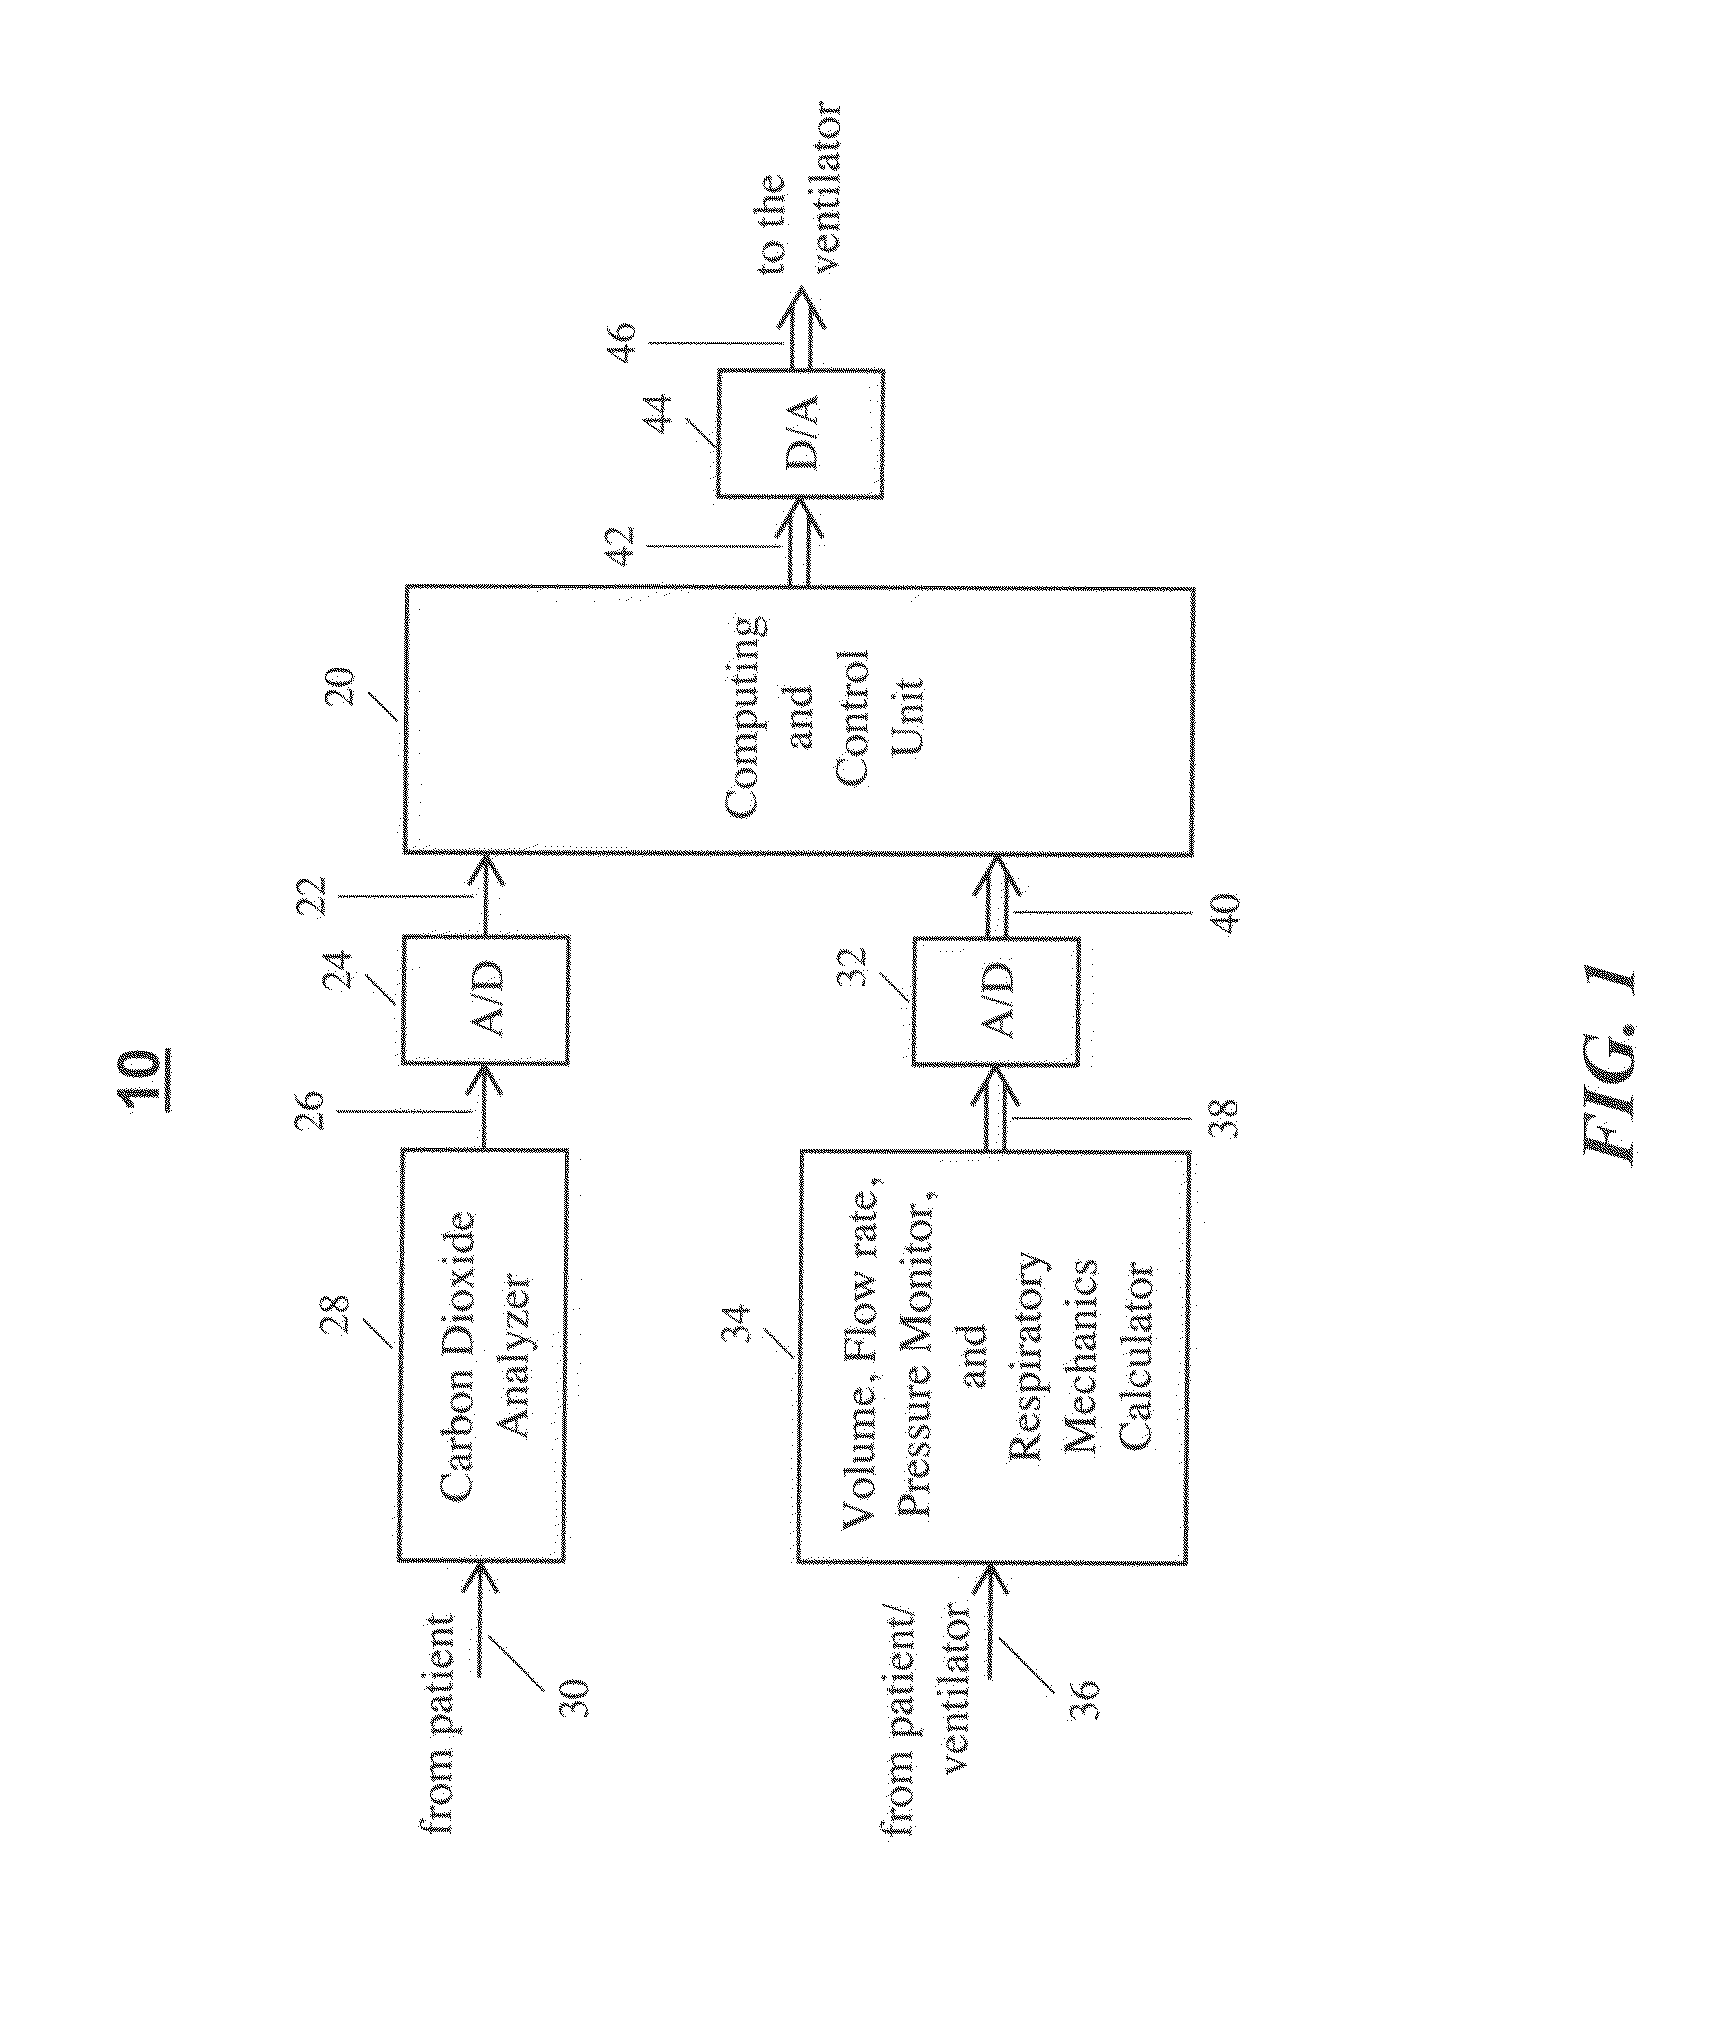 Automatic control system for mechanical ventilation for active or passive subjects